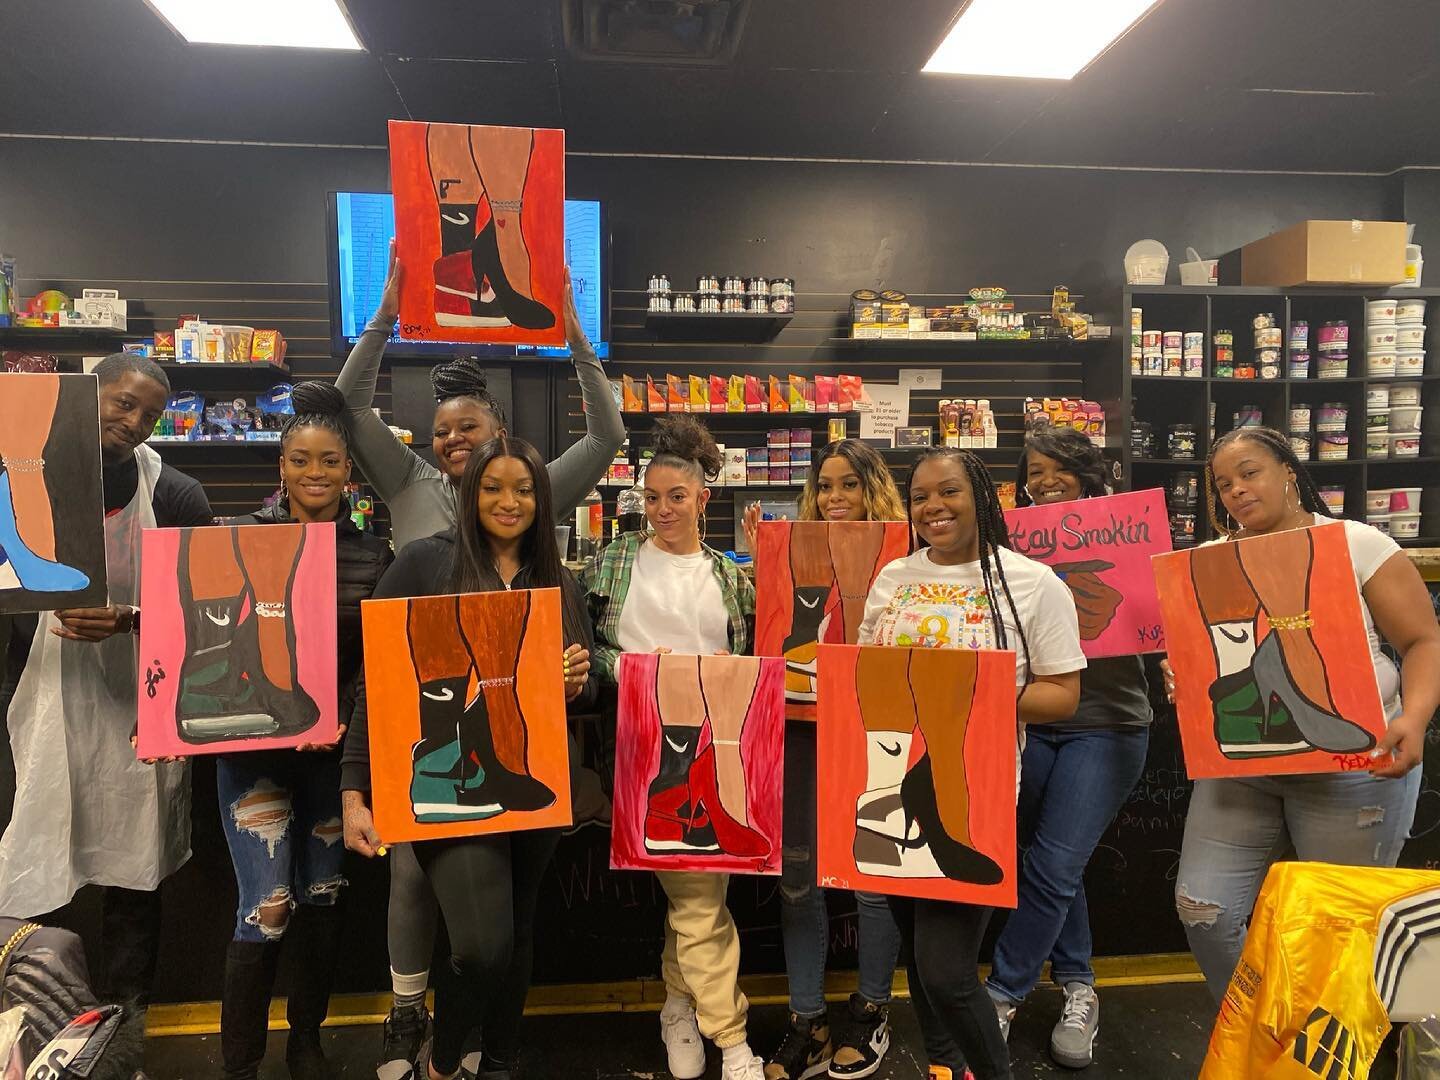 The ladies showed out on their paintings at the #UltimatePaintParty s/o to @kiingzkloudz for having us! 🥳🎨👠👟